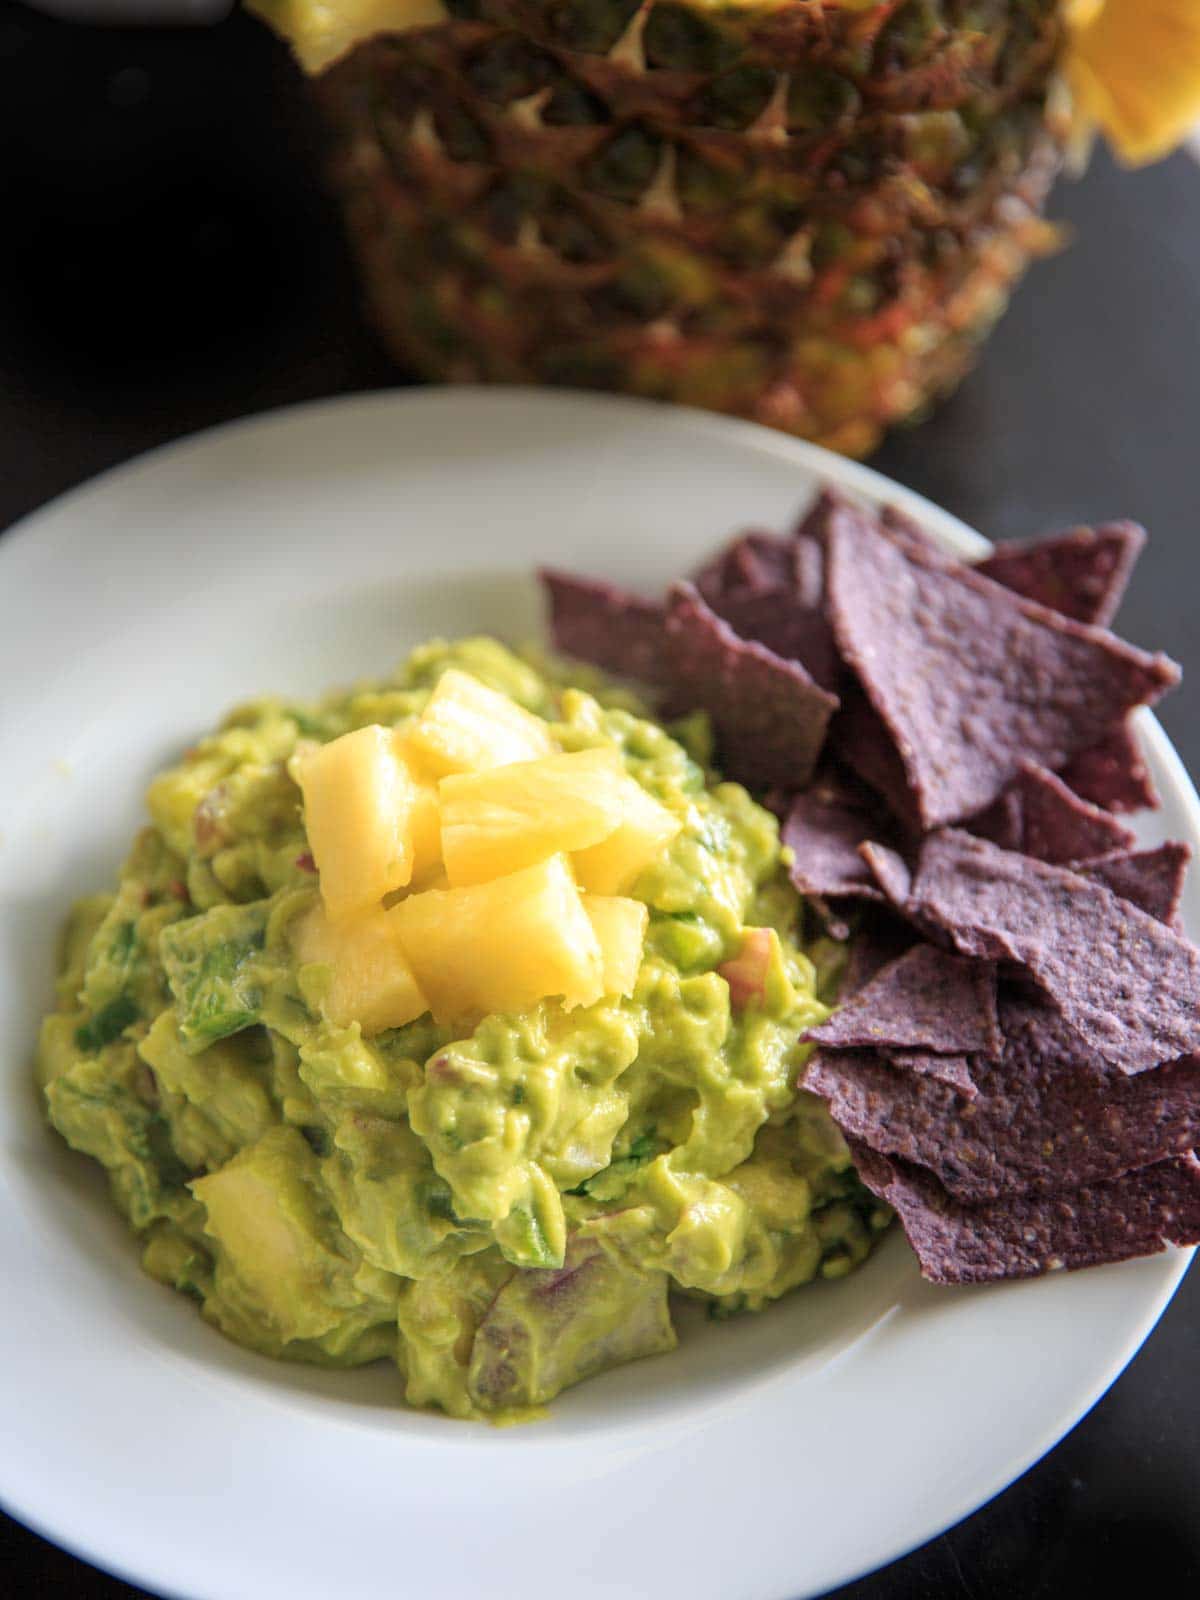 Pineapple Jalapeno Guacamole on white plate with purple/blue tortilla chips on side